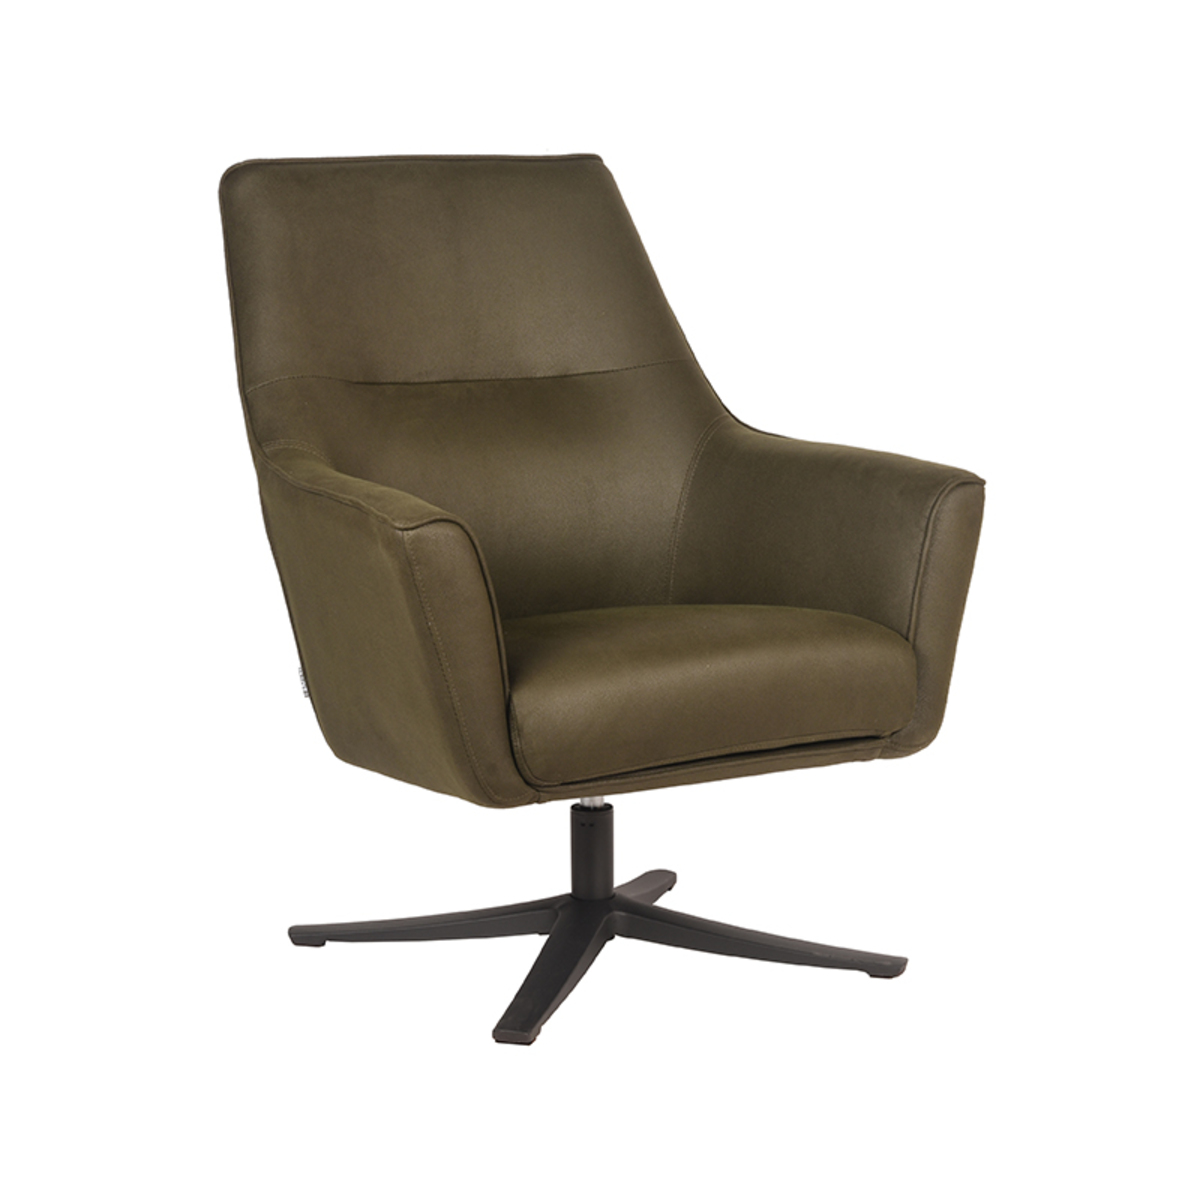 LABEL51 Fauteuil Tod - Army green - Microfiber